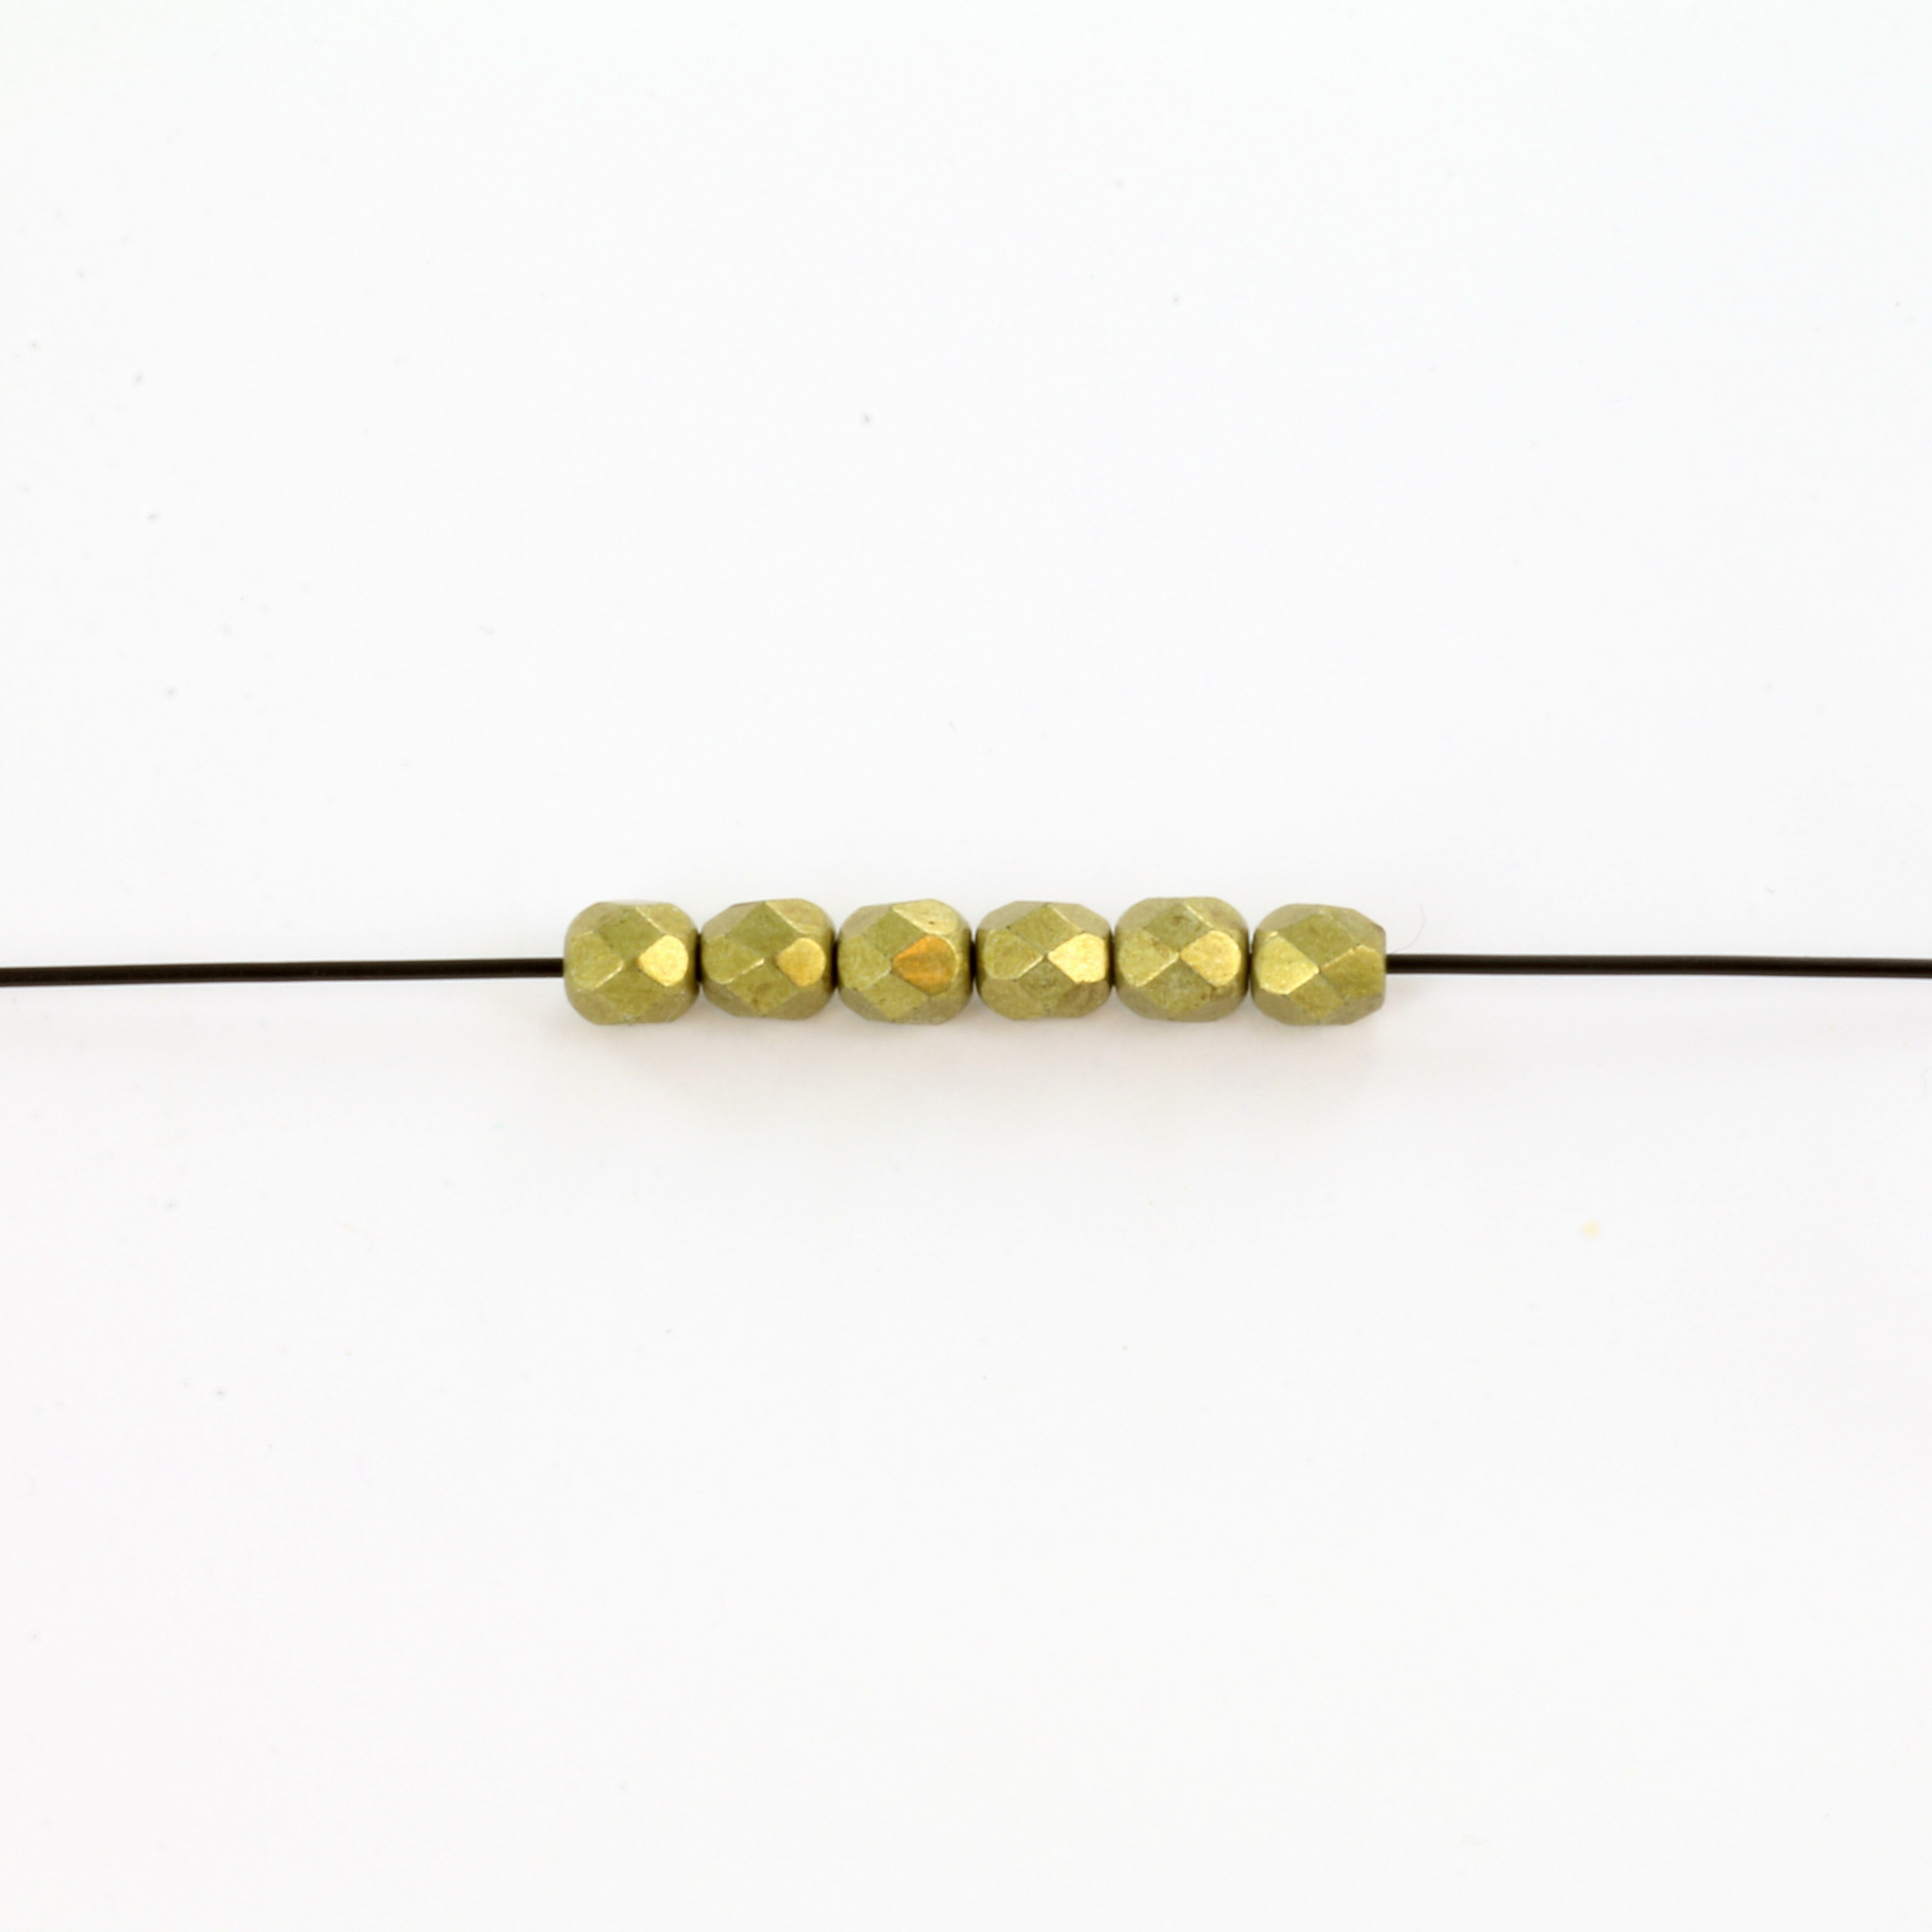 Extra pictures Czech faceted round 4 mm - saturated metallic golden lime